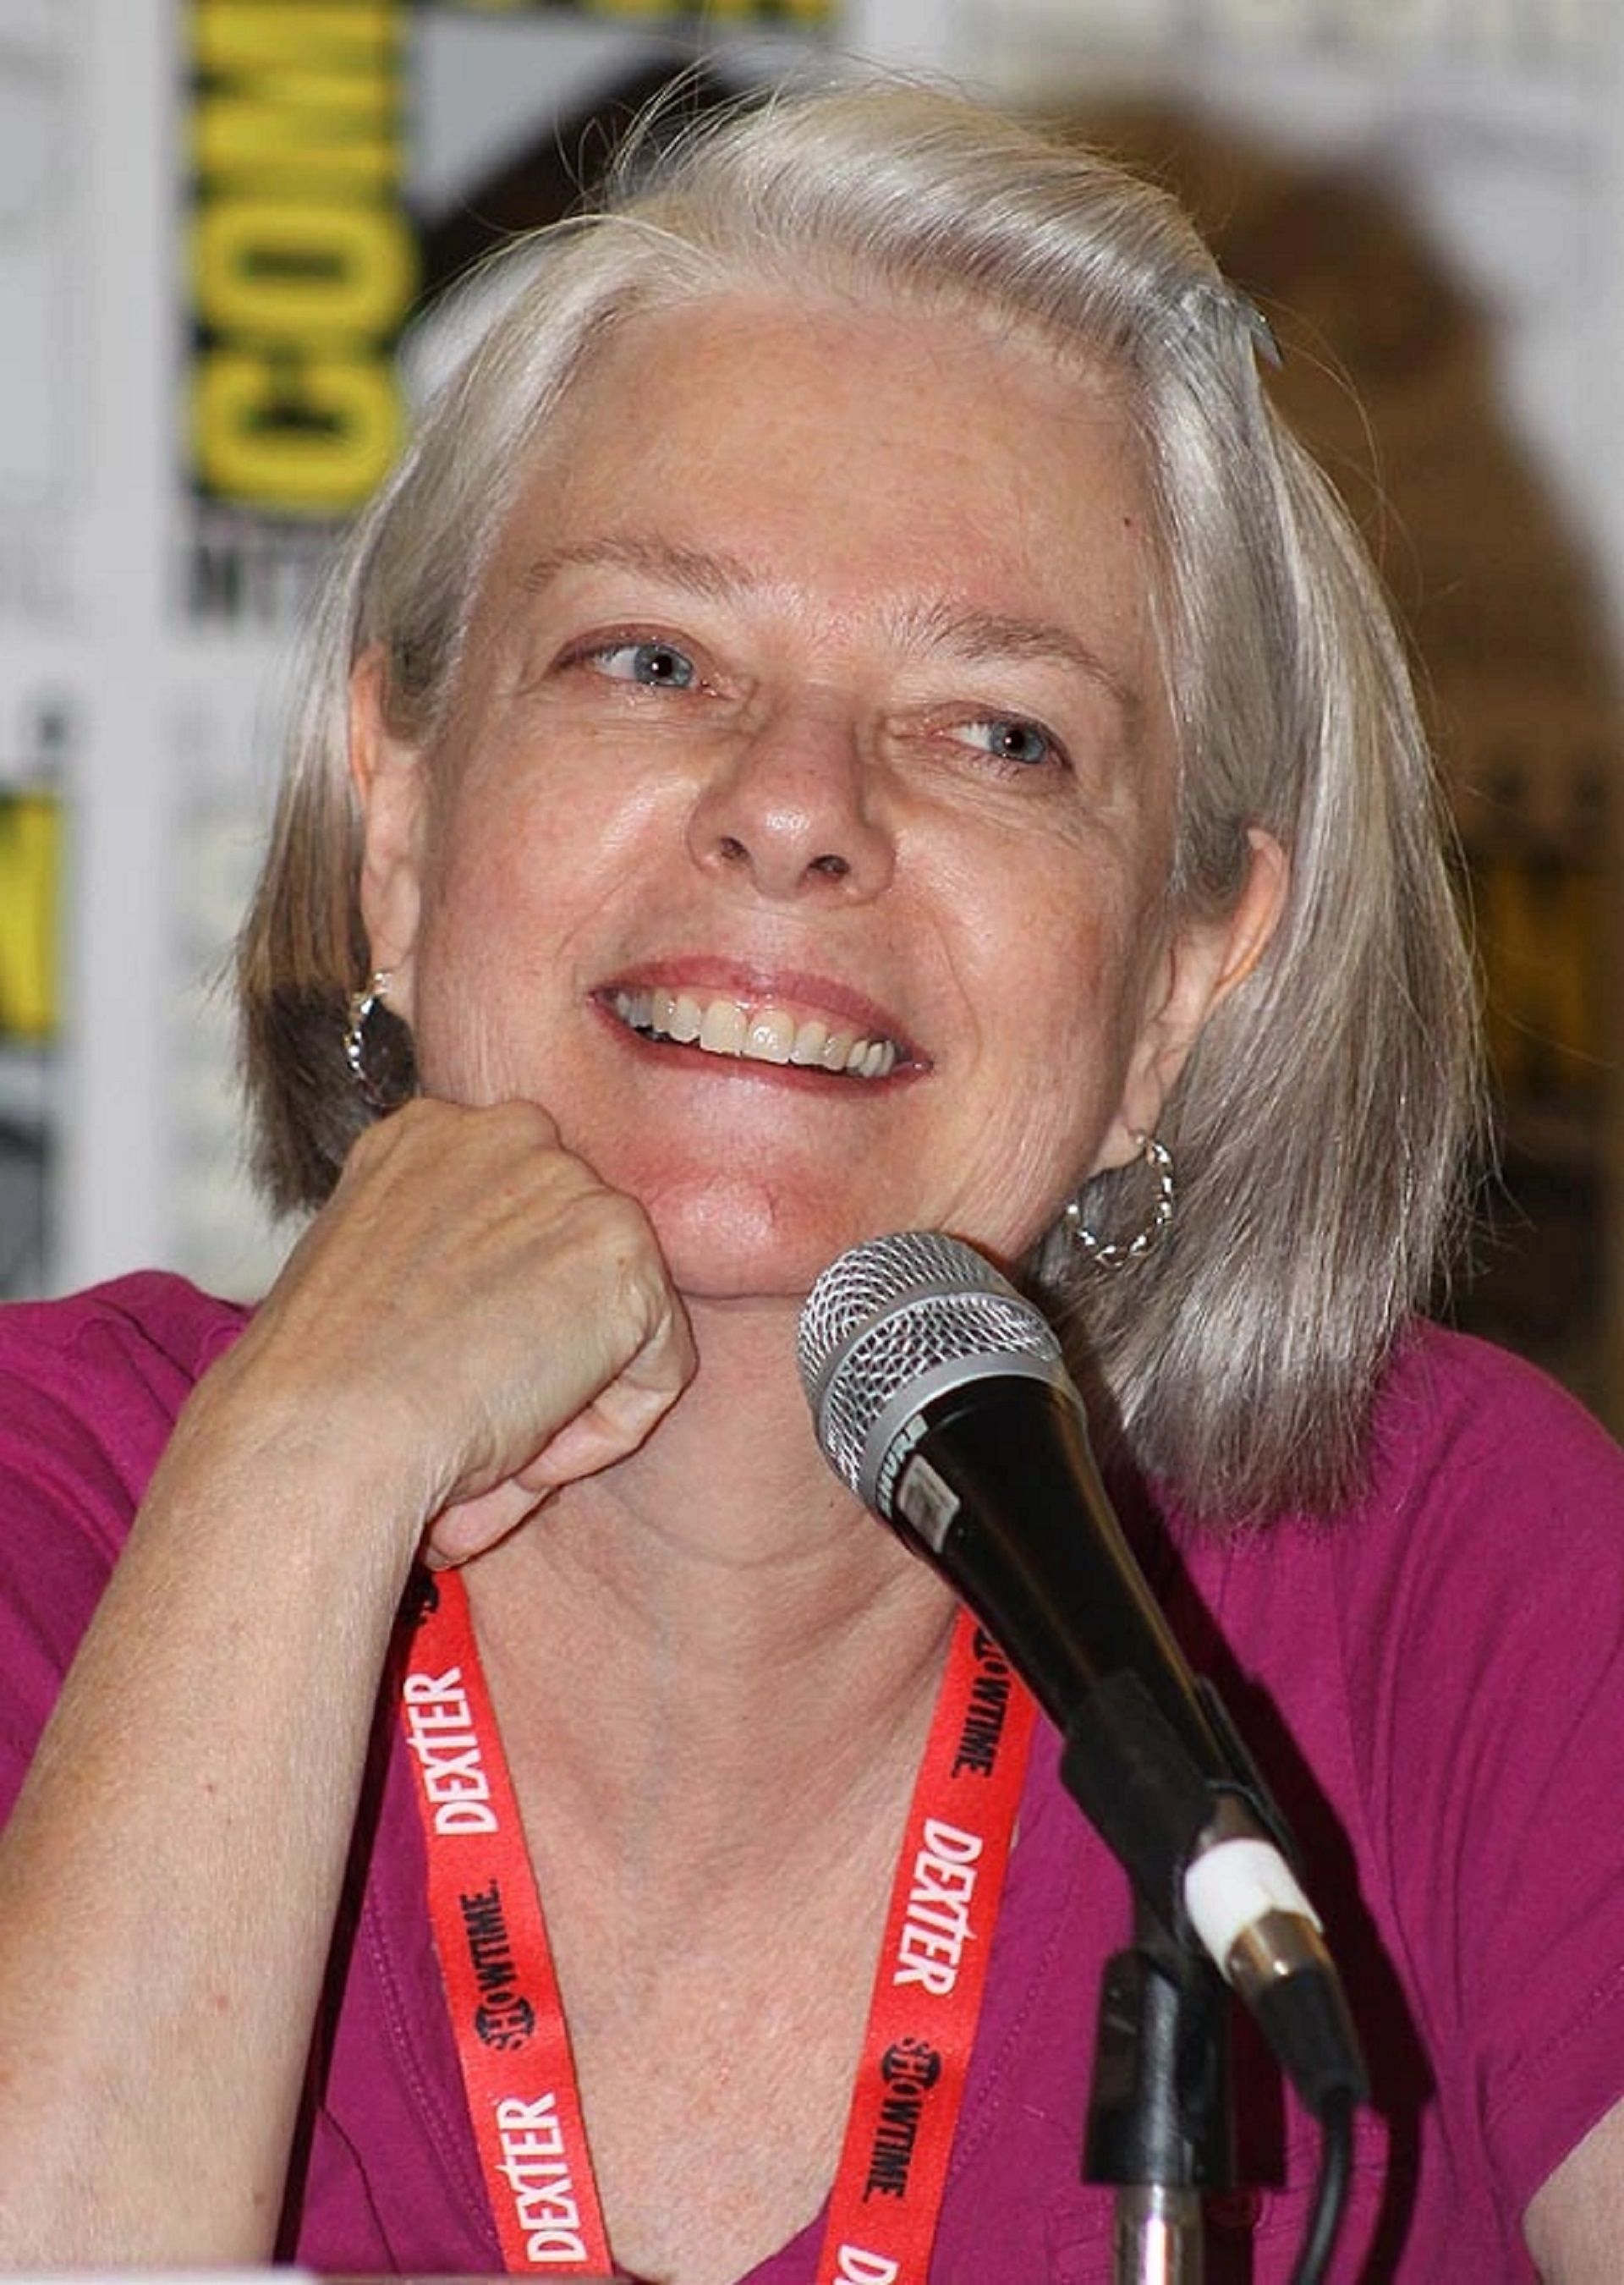 Louise Simonson is often recognized by her nickname &#039;Weezie&#039; (Image via Women in comics)